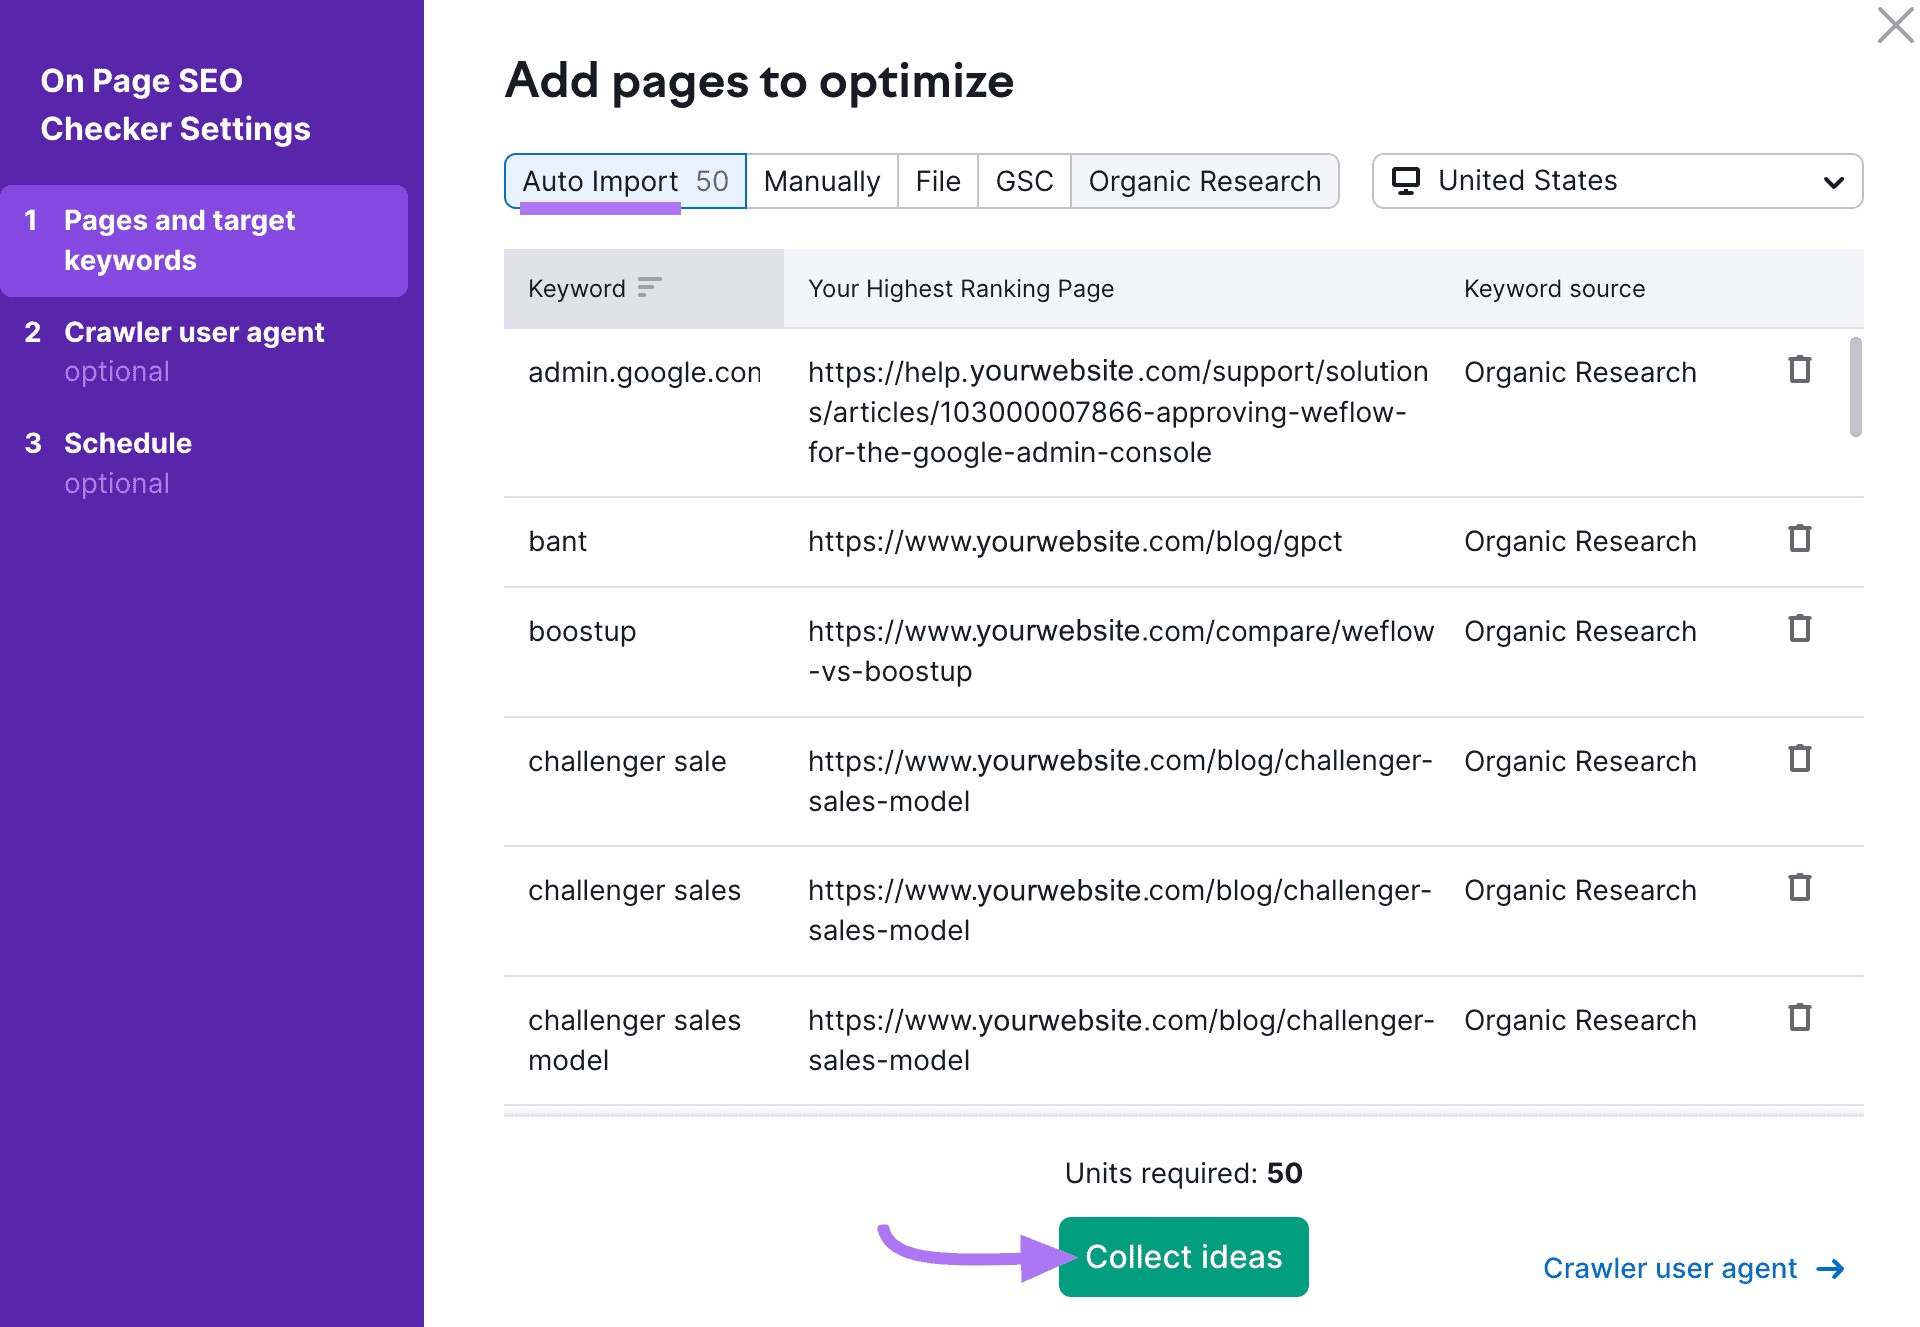 "Add pages to optimize" window in On Page SEO Checker Settings